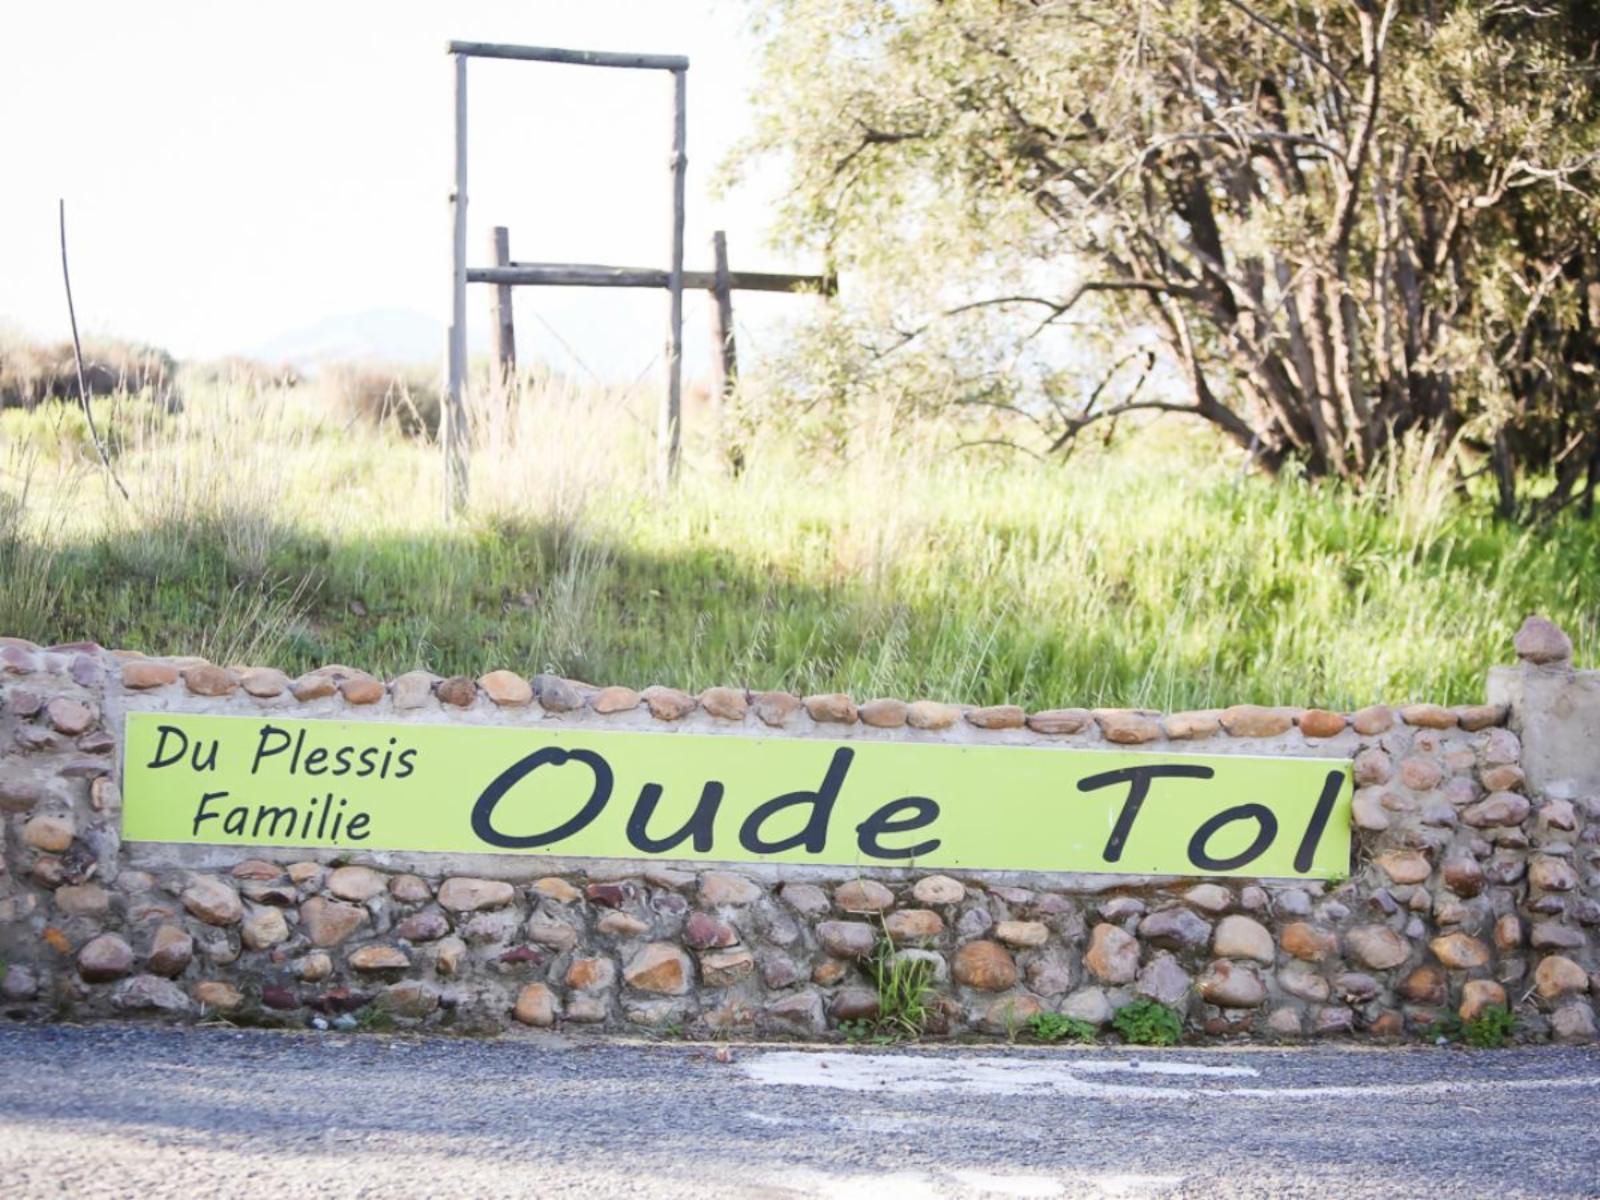 By Oude Tol Farm Tulbagh Western Cape South Africa Sign, Text